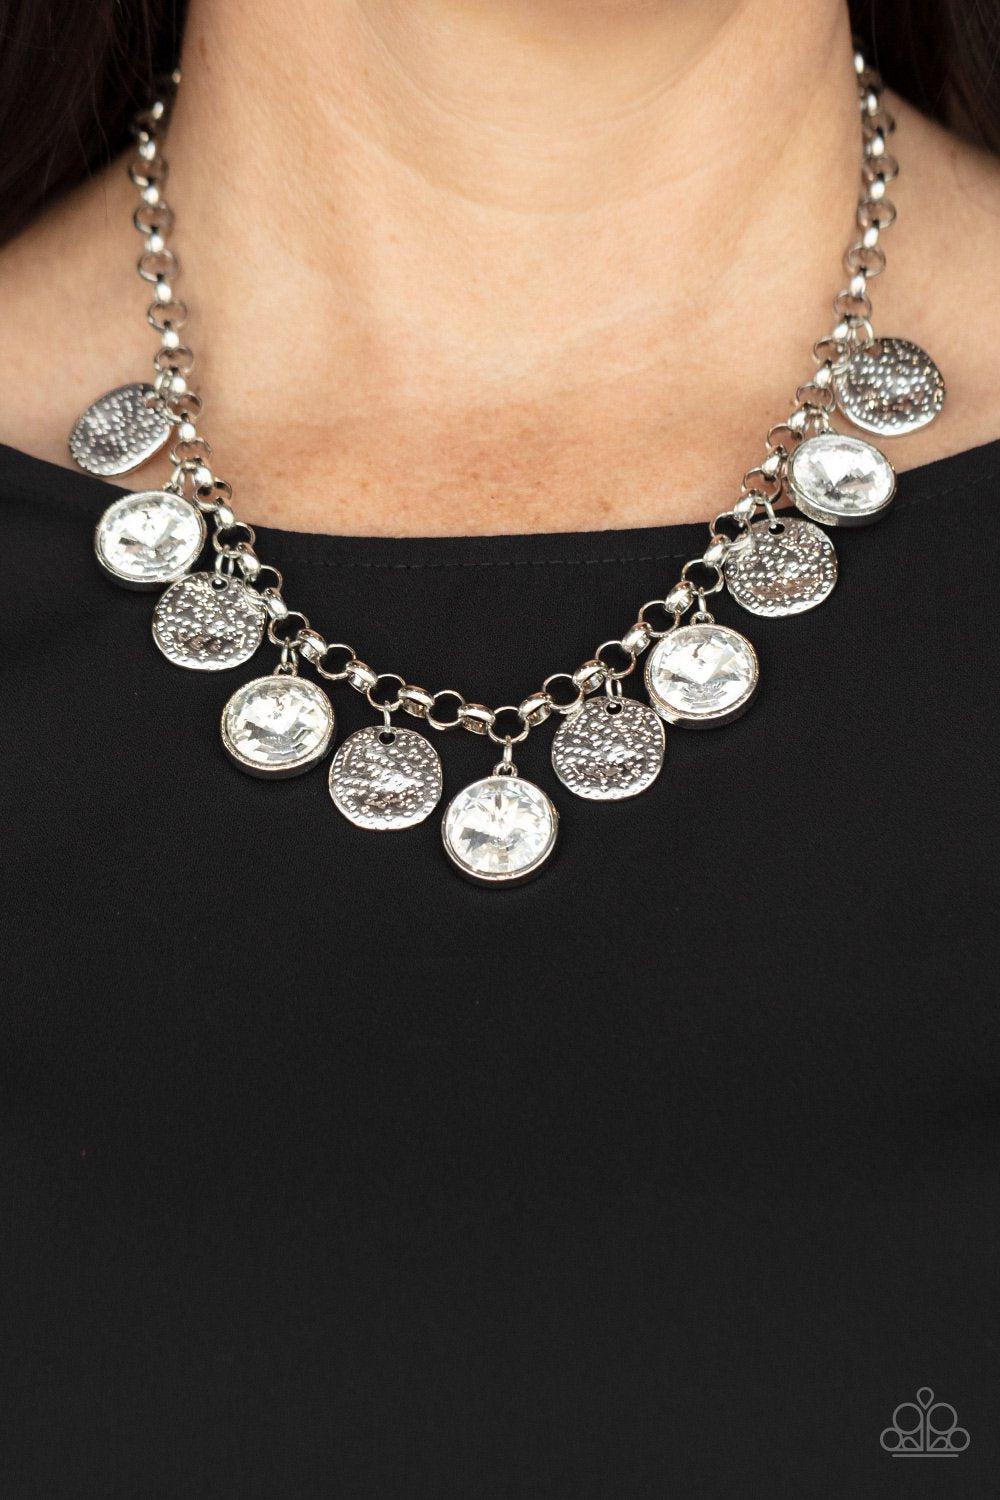 Spot On Sparkle White Rhinestone and Silver Necklace - Paparazzi Accessories 2021 Convention Exclusive- lightbox - CarasShop.com - $5 Jewelry by Cara Jewels